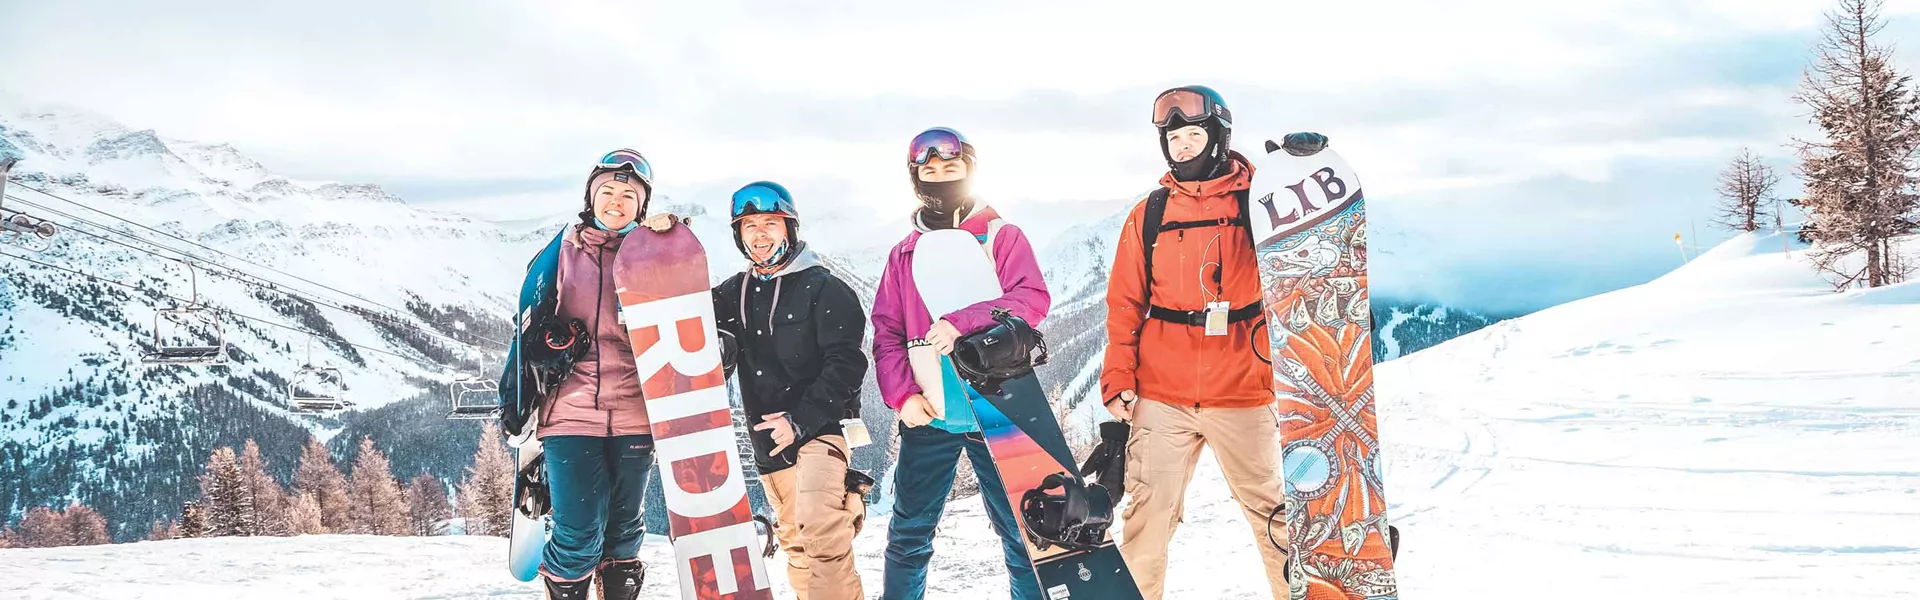 Group Of Snowboarders In Canada Mountains Hero 0002AMER2020